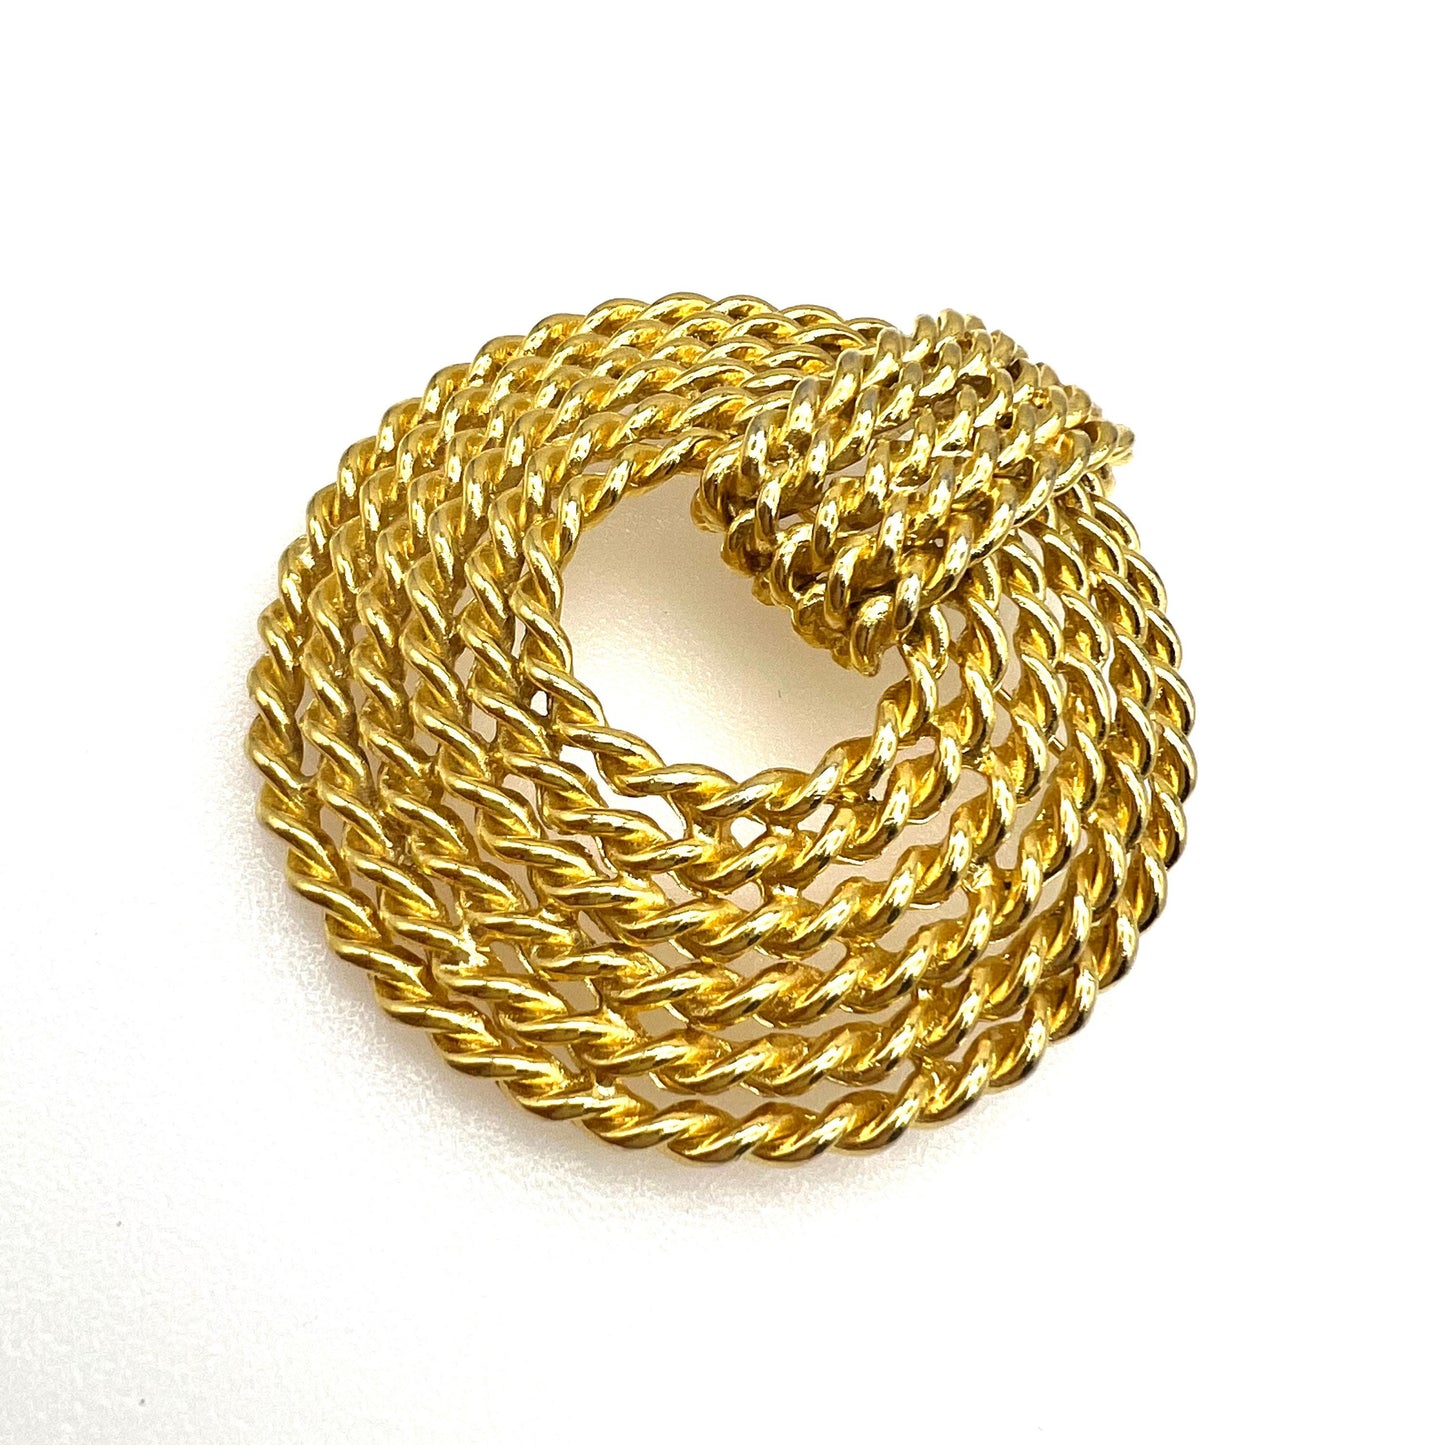 Unsigned Modernist Belted Circles Brooch